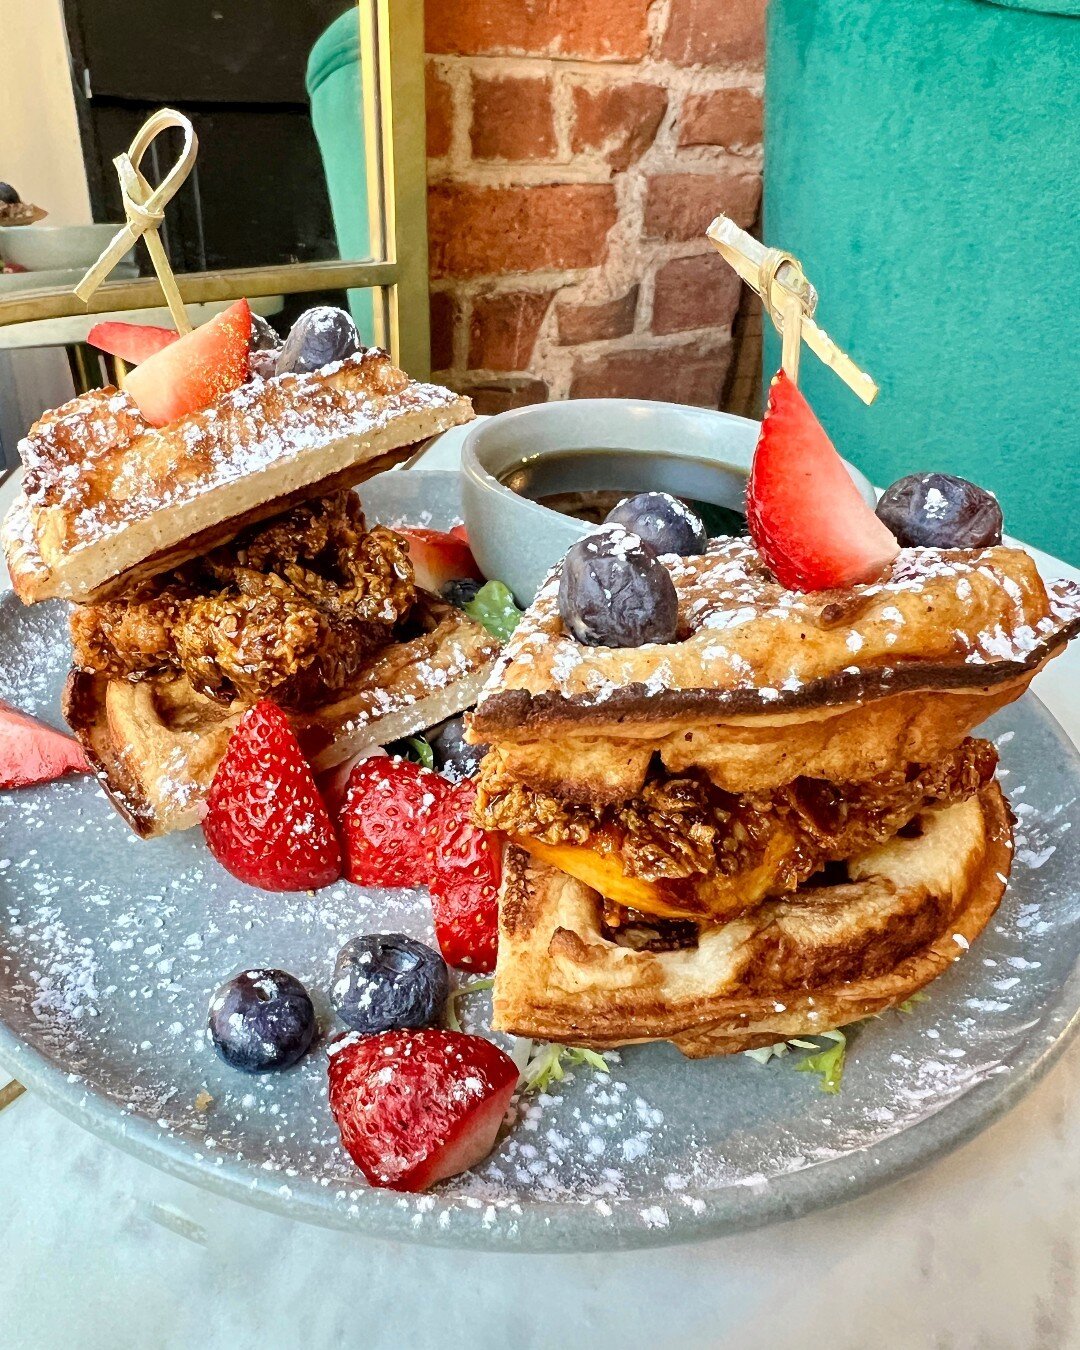 It's not too late to make your Easter Sunday Brunch reservation! This Sunday we'll be serving an All You Can Eat Buffet ($35/person), which includes:

🐰 Firecracker Chicken &amp; Waffle Sliders
🐰 Baked Mac &amp; Cheese
🐰 Buttermilk Pancakes
🐰 Scr